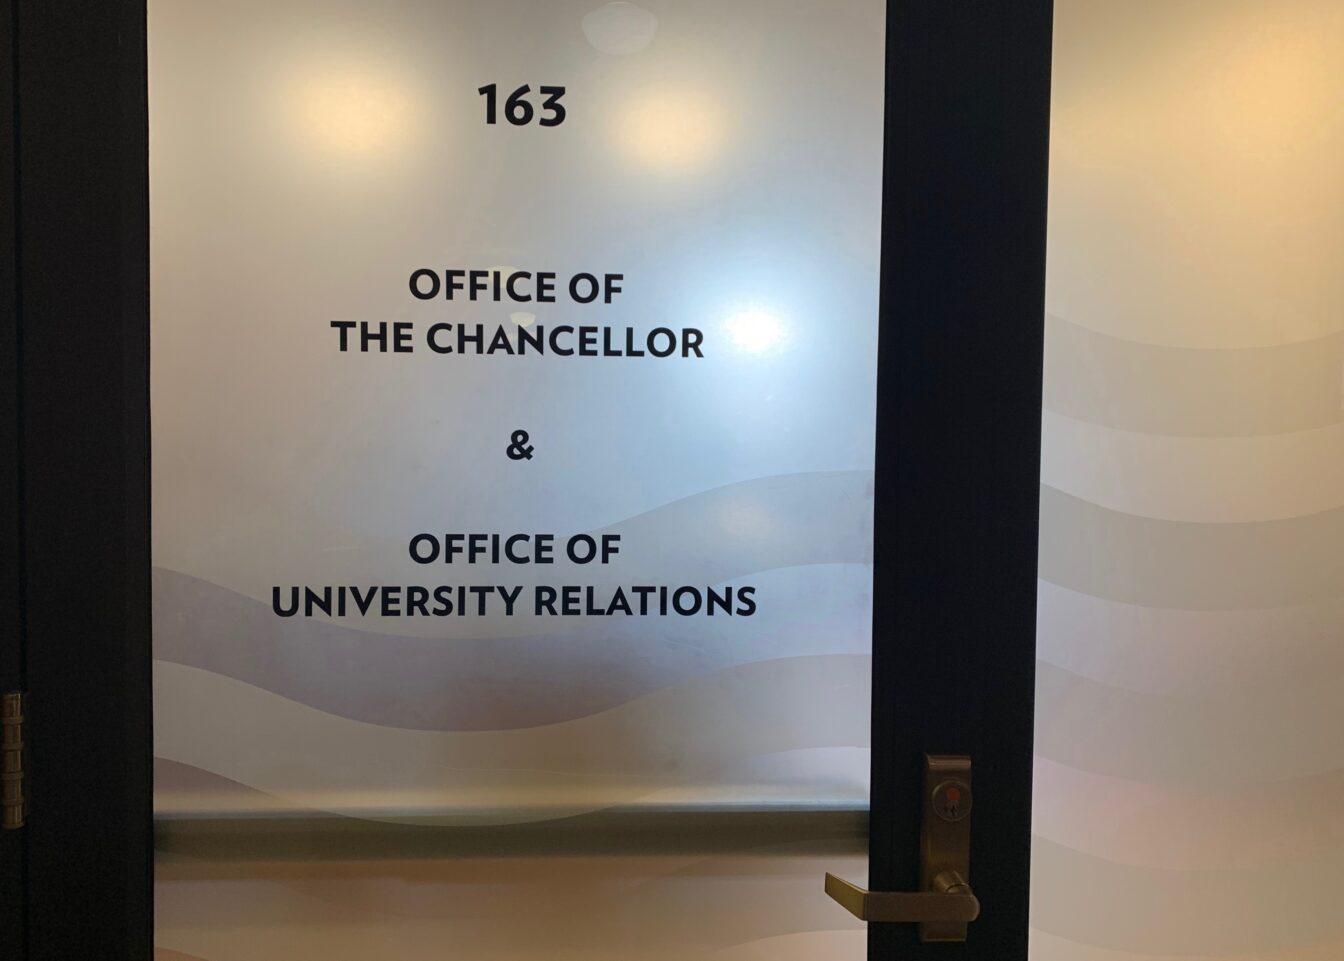 UW Search & Screen Committee conducts semi-final round of interviews for new chancellor